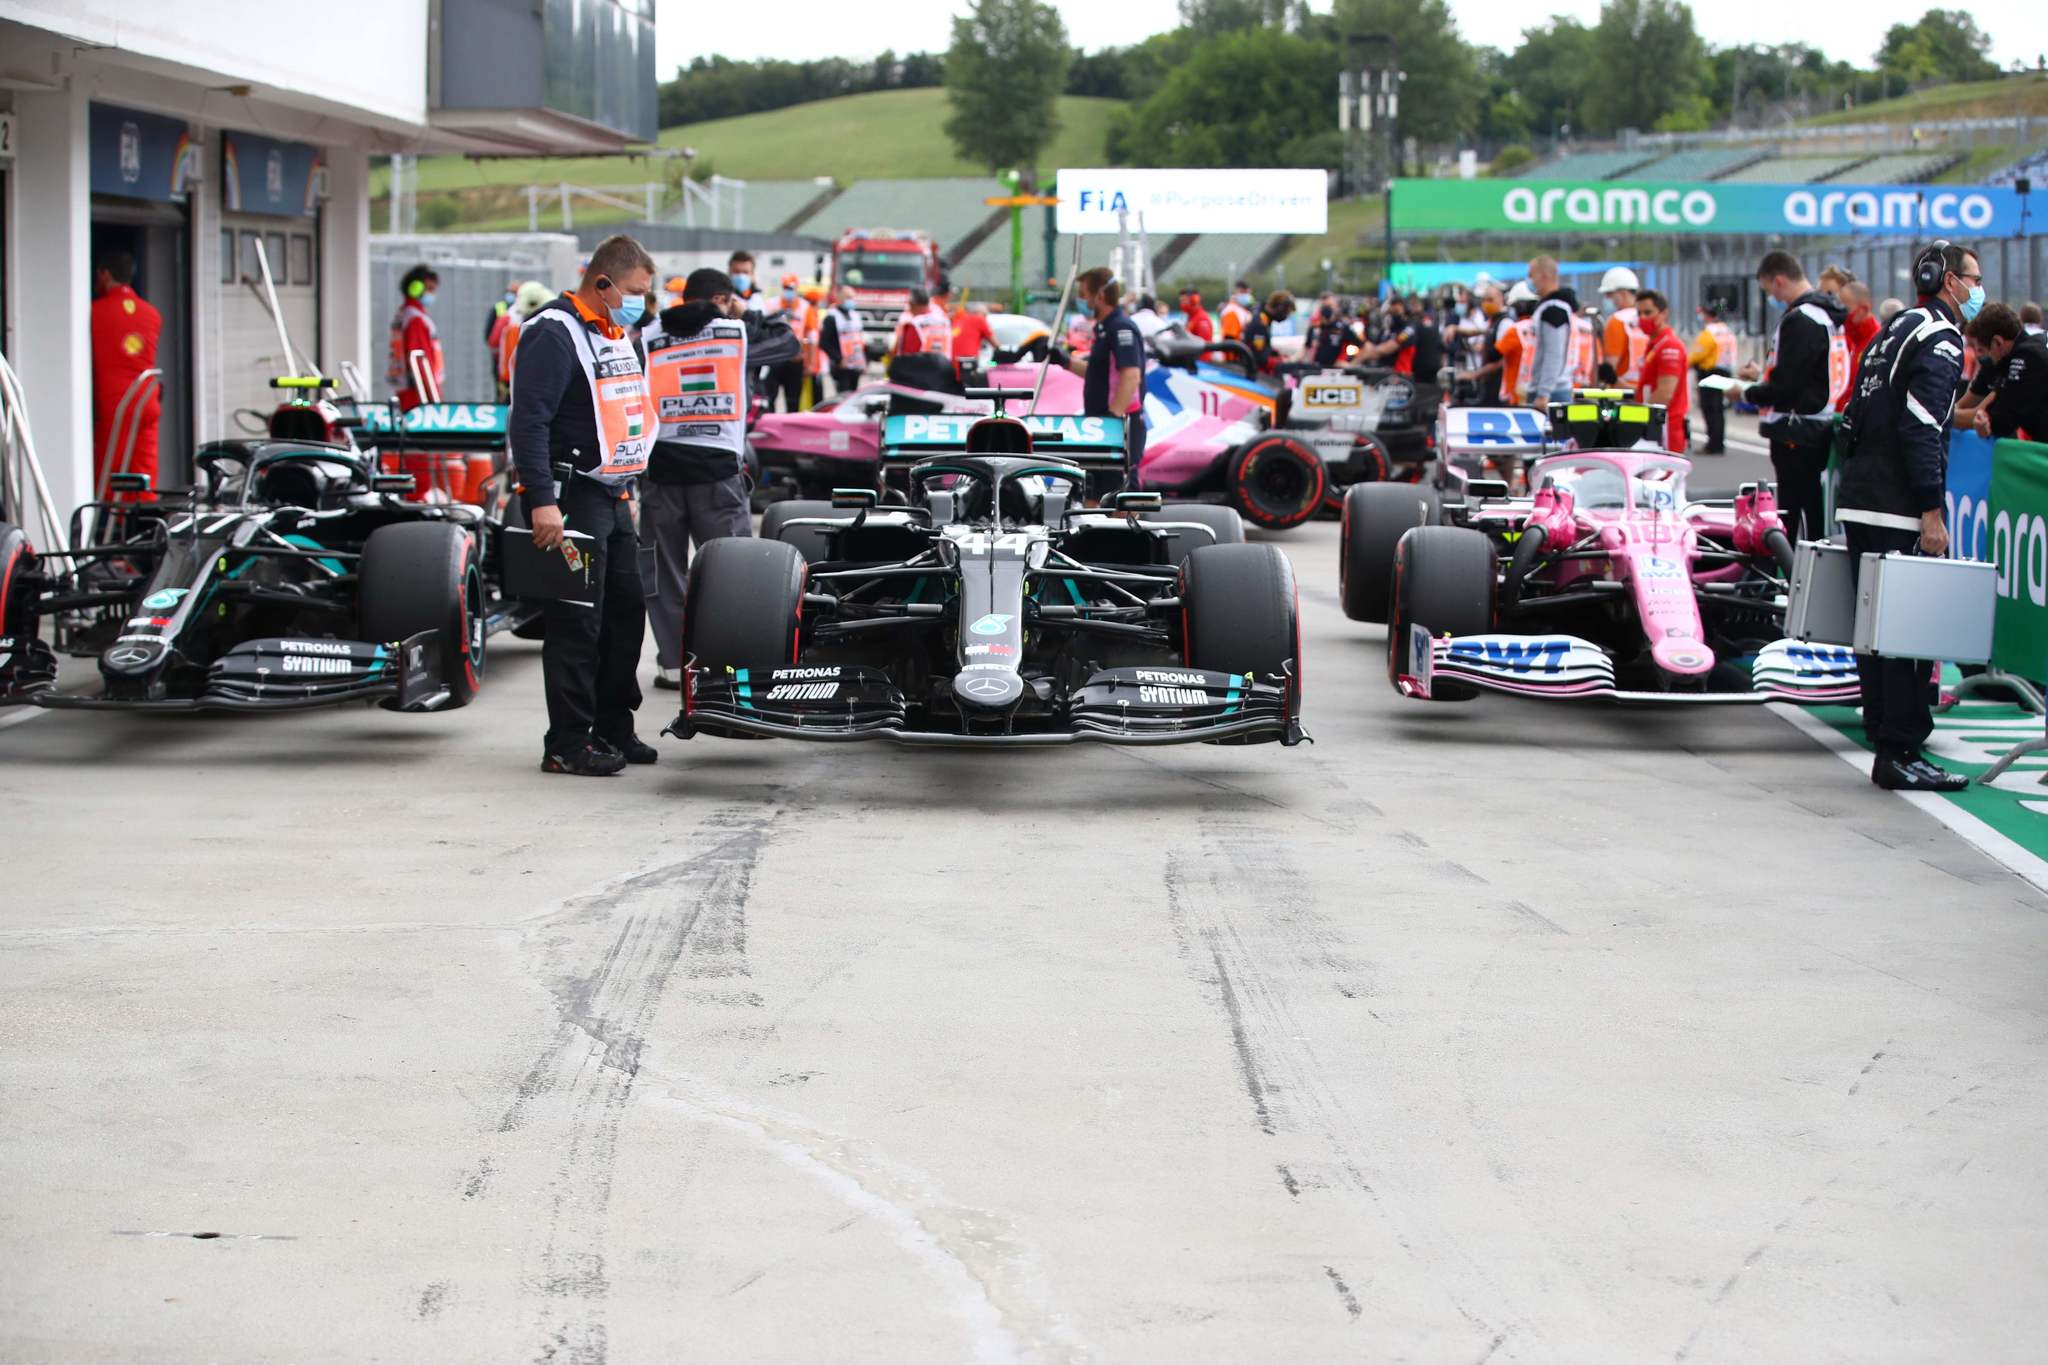 The cars of (L-R) Mercedes Finnish driver Valtteri Bottas, Mercedes British driver Lewis Hamilton and lt;HIT gt;Racing lt;/HIT gt; lt;HIT gt;Point lt;/HIT gt;s Canadian driver Lance Stroll are lined up after the qualifying session for the Formula One Hungarian Grand Prix at the Hungaroring circuit in Mogyorod near Budapest, Hungary, on July 18, 2020. (Photo by Mark Thompson / POOL / AFP)